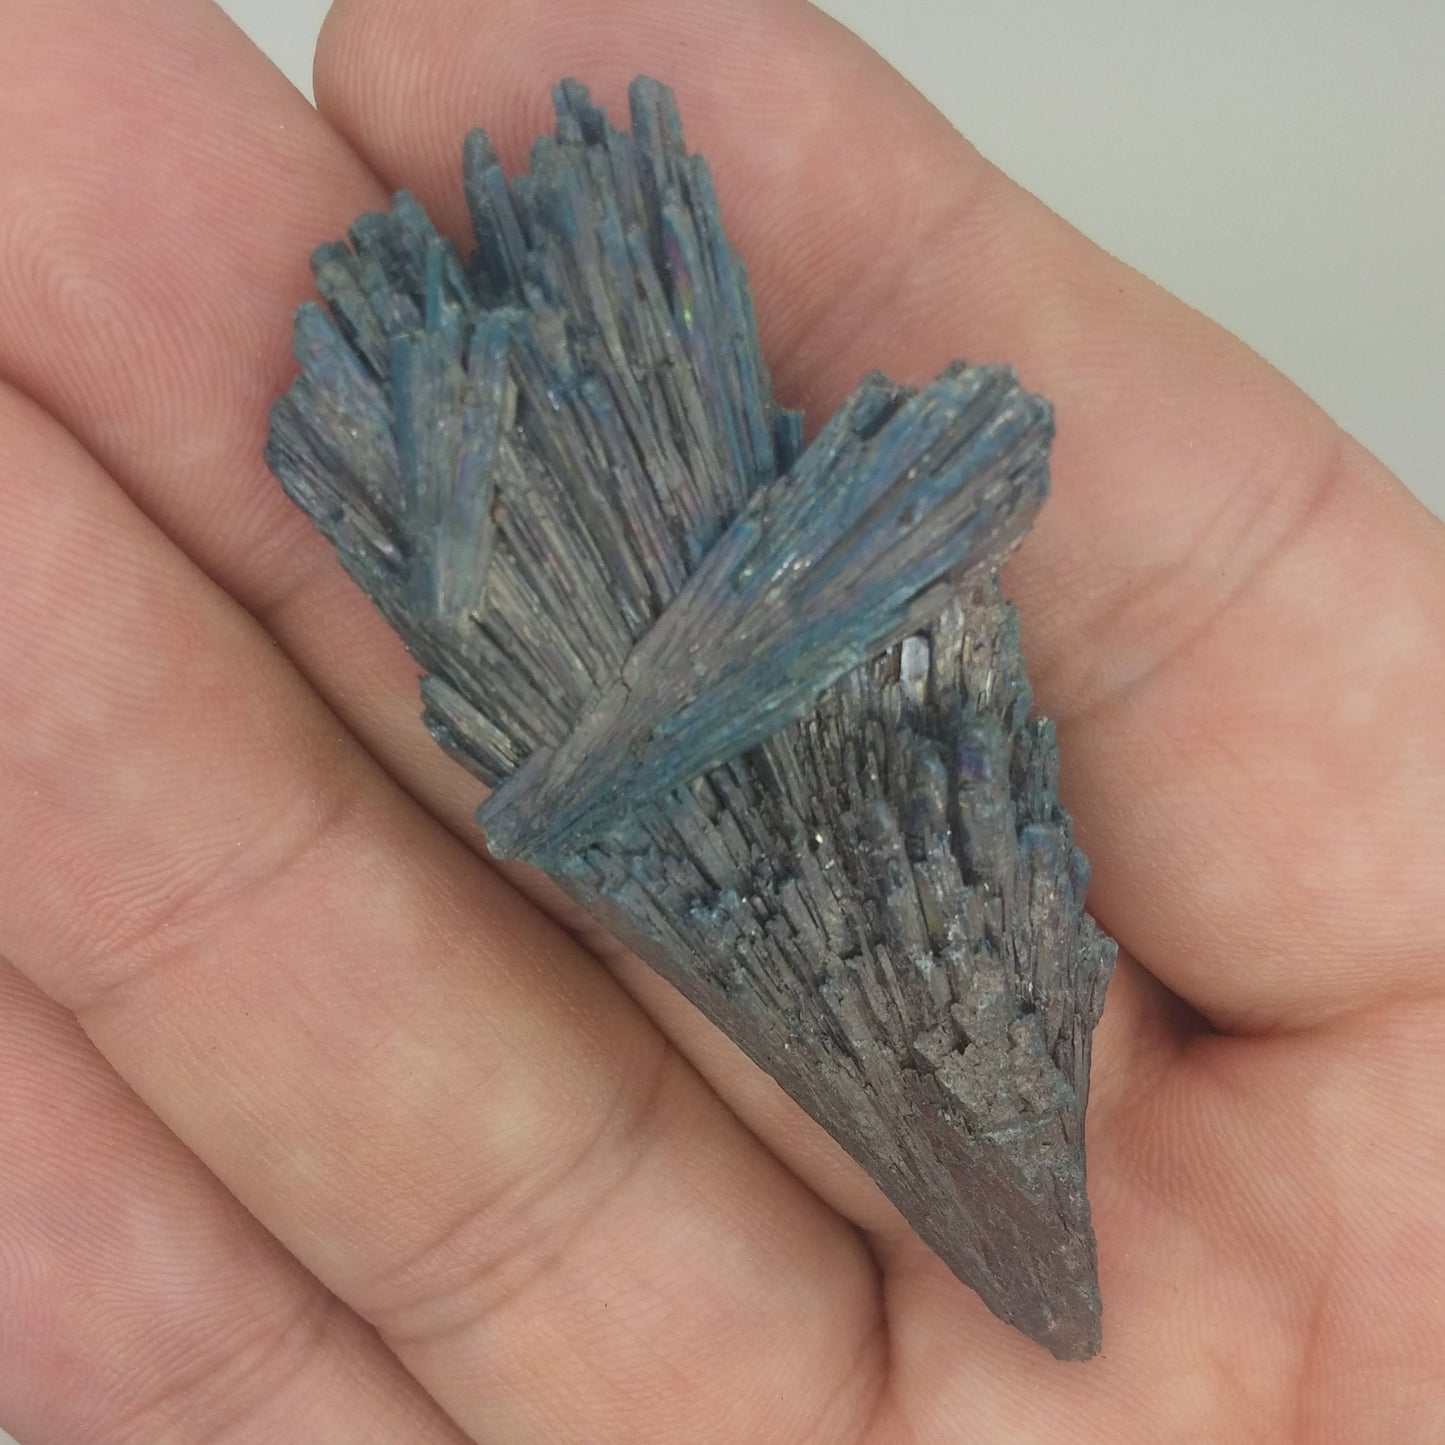 Black Kyanite Aura Specimen | Metaphysical | Opalized | Wire Wrapping | 1D